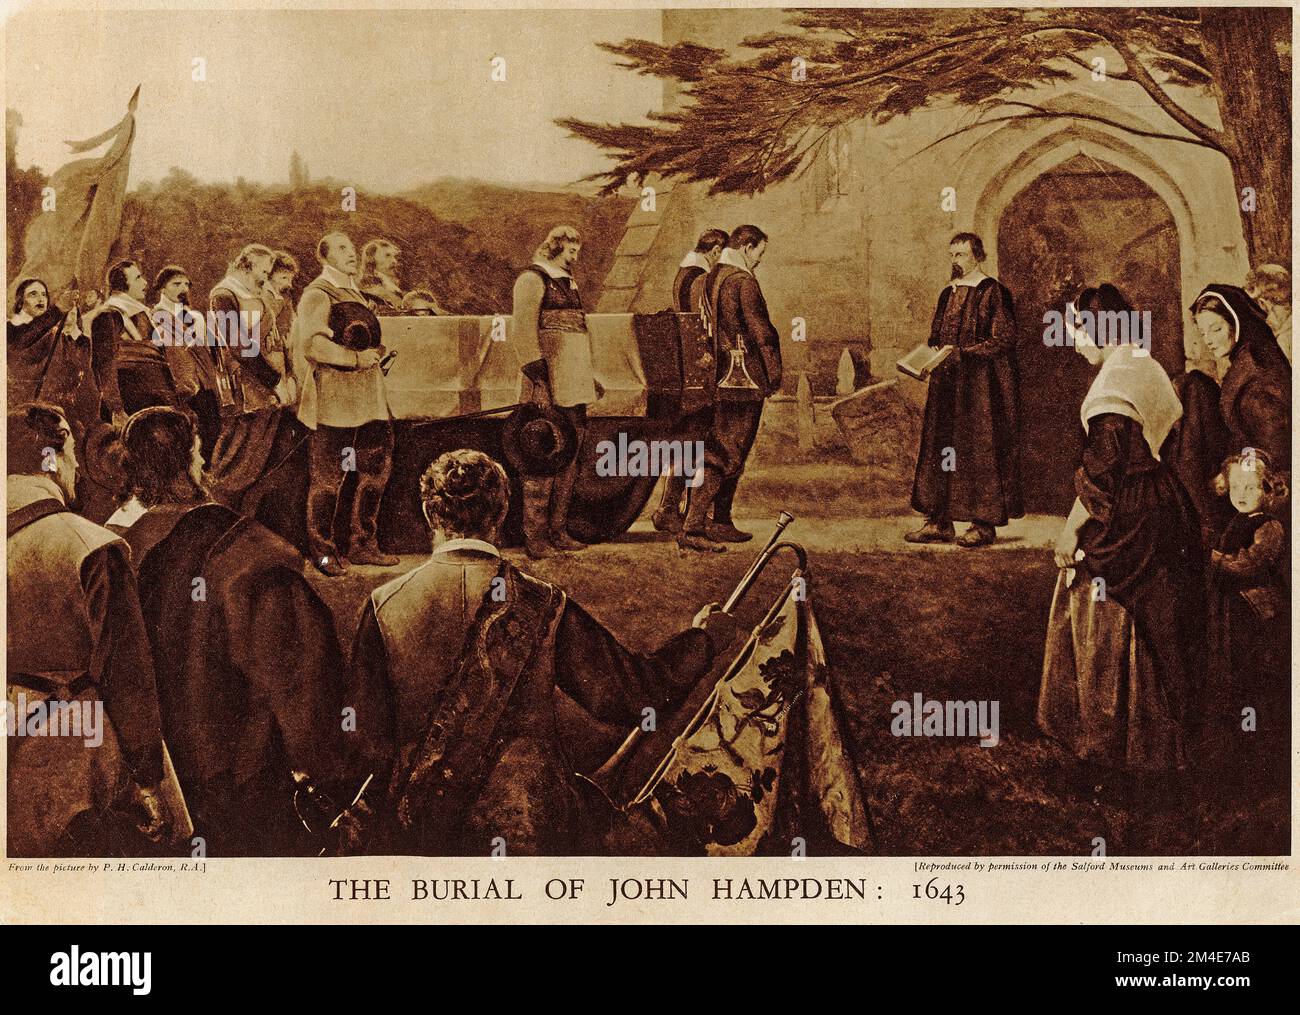 Halftone of the burial of John Hampden, from an educational publication in 1927.  John Hampden was an English landowner and politician whose opposition to arbitrary taxes imposed by Charles I made him a national figure. An ally of Parliamentarian leader John Pym, and cousin to Oliver Cromwell, he was one of the Five Members whose attempted arrest in January 1642 sparked the First English Civil War. Stock Photo